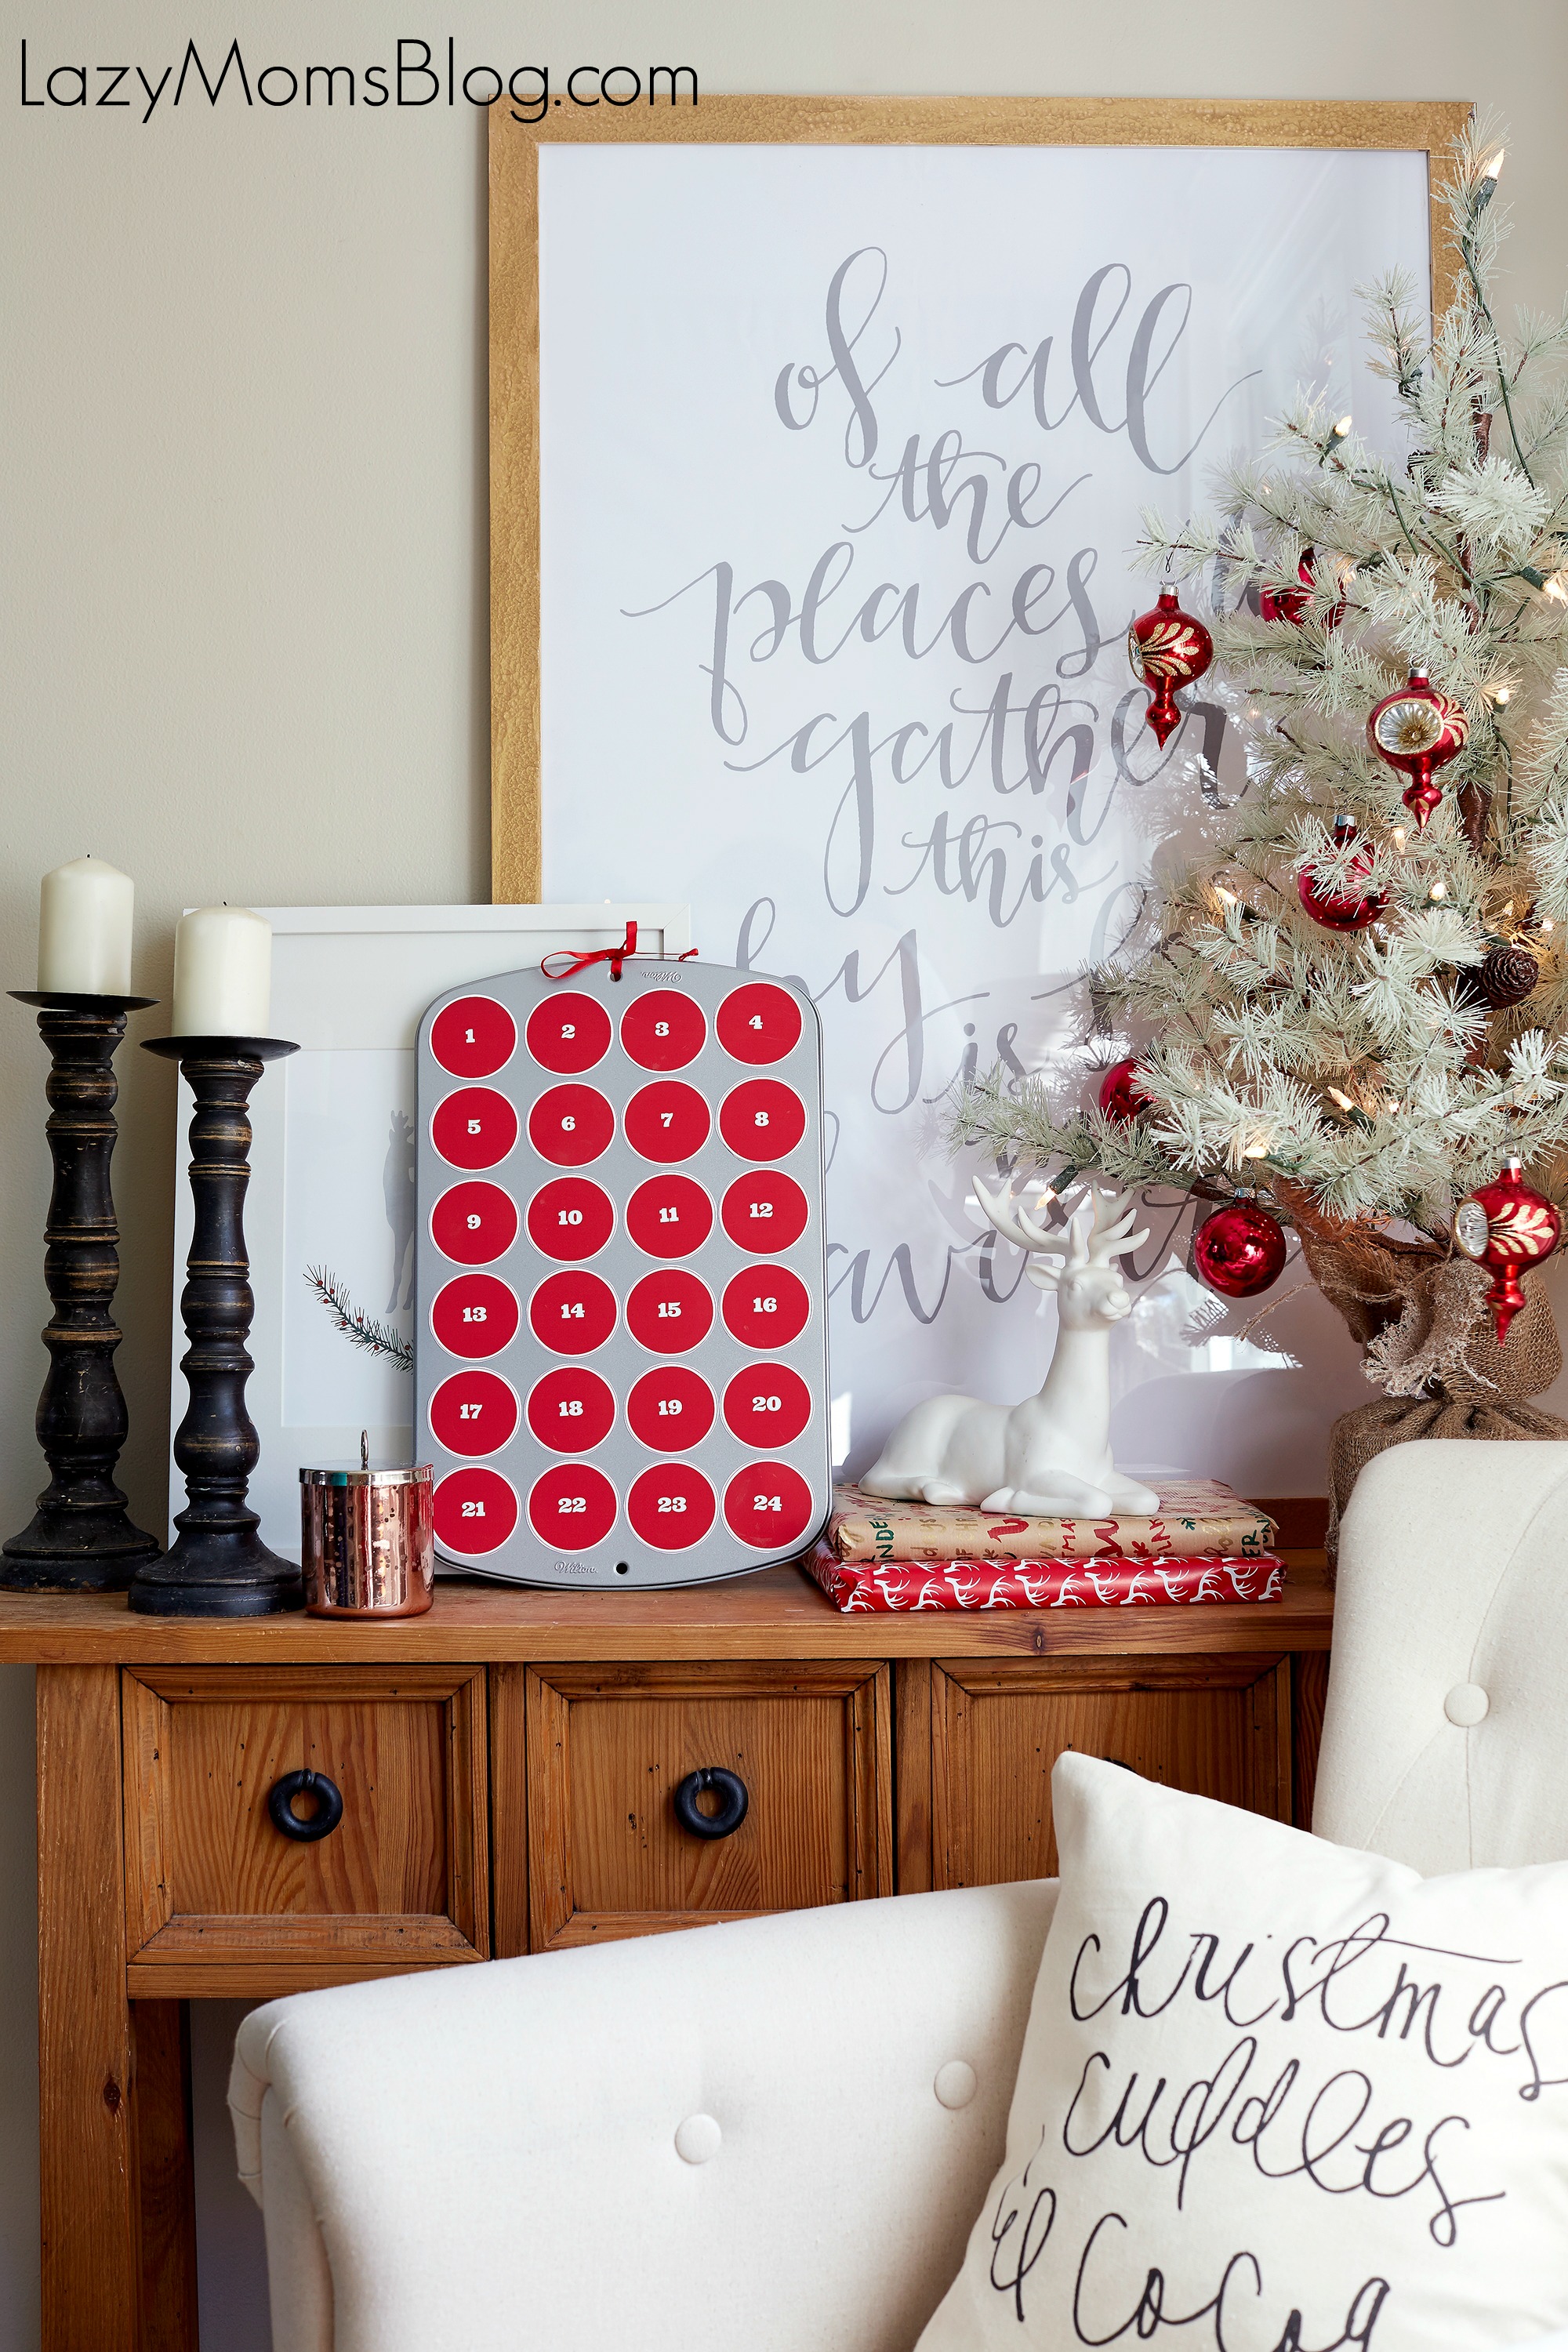 This easy DIY advent calendar is a great way of adding some festive cheer to your everyday! Come grab a free printable to make your own easy advent calendar 